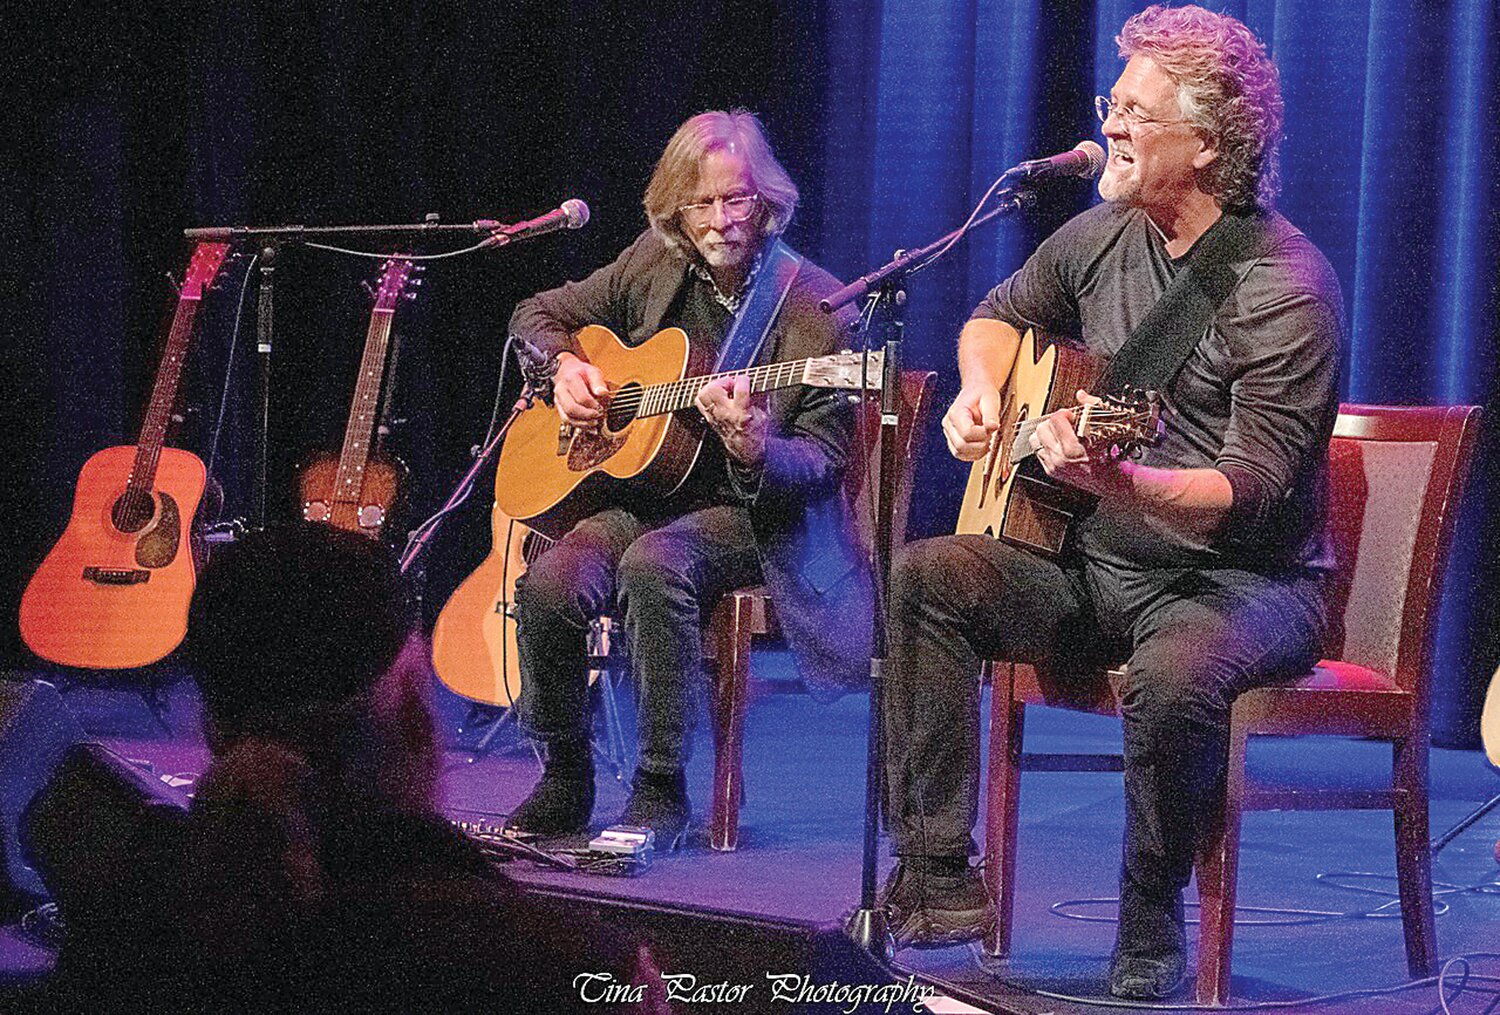 Tim Farrell and Craig Thatcher will play the Sellersville Theater on Feb. 7.